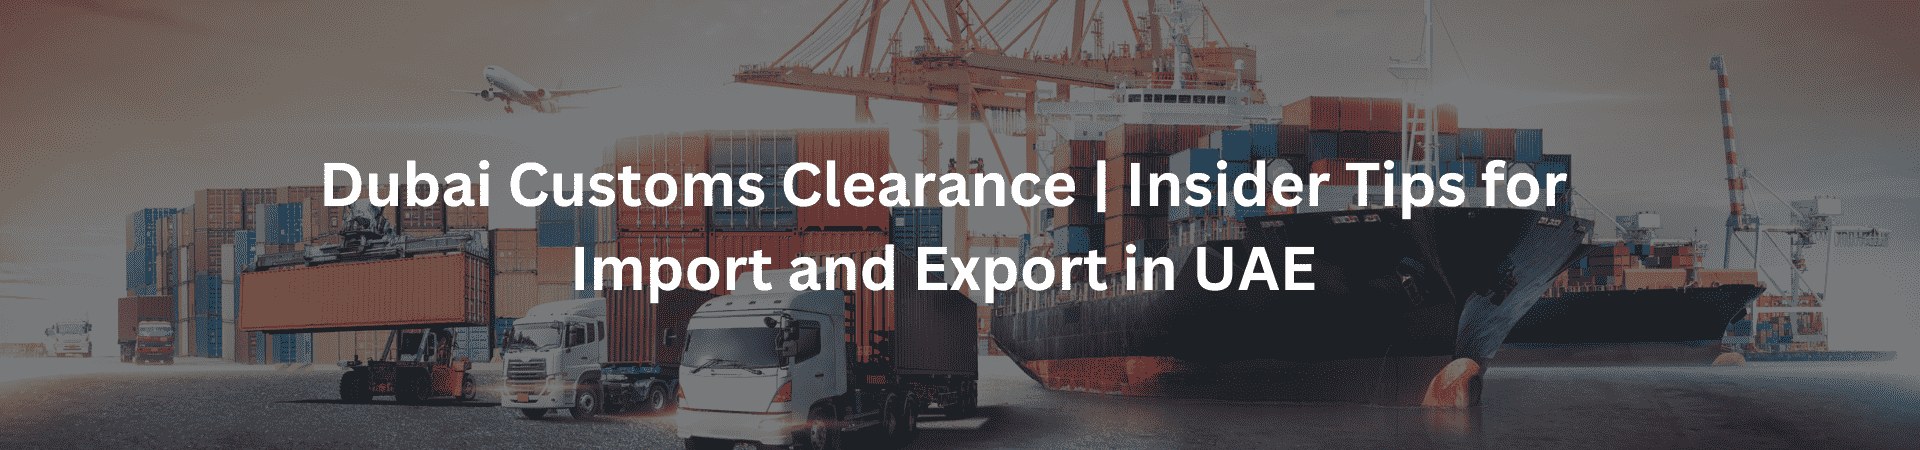 Dubai Customs Clearance Insider Tips for Import and Export in UAE - Riseonic Shiping Line